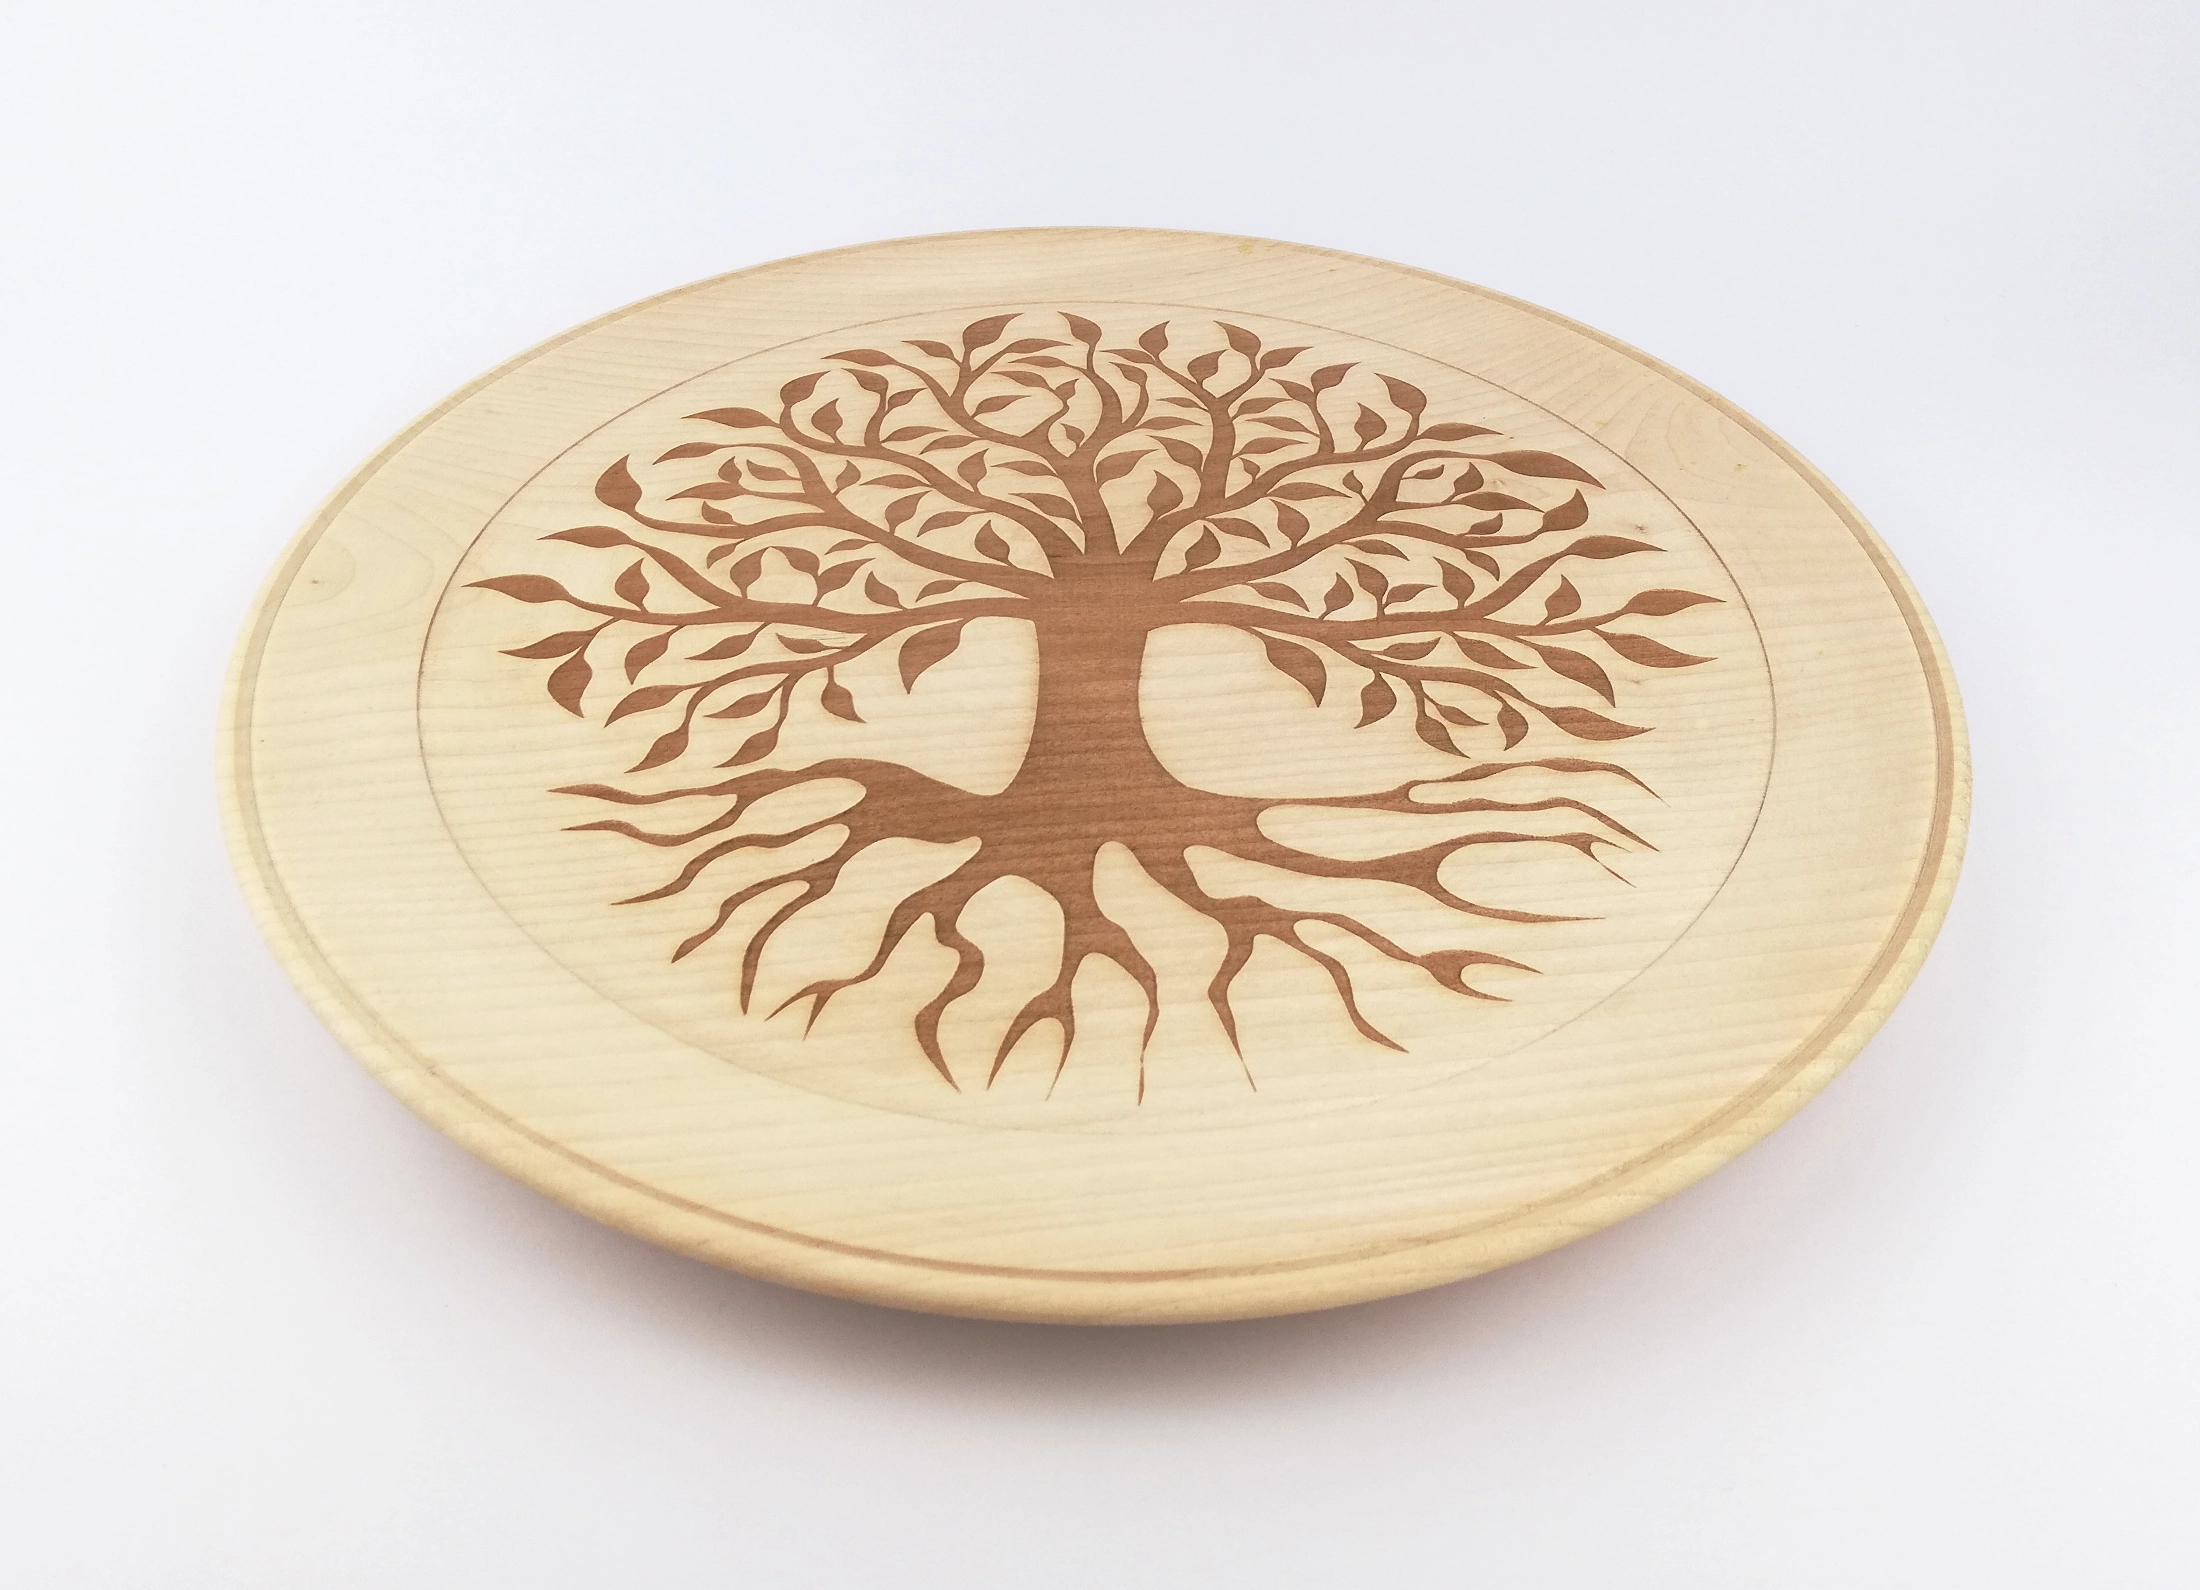 Tree of life (version 1) on a big plate (32cm/12.6in in diameter), side.